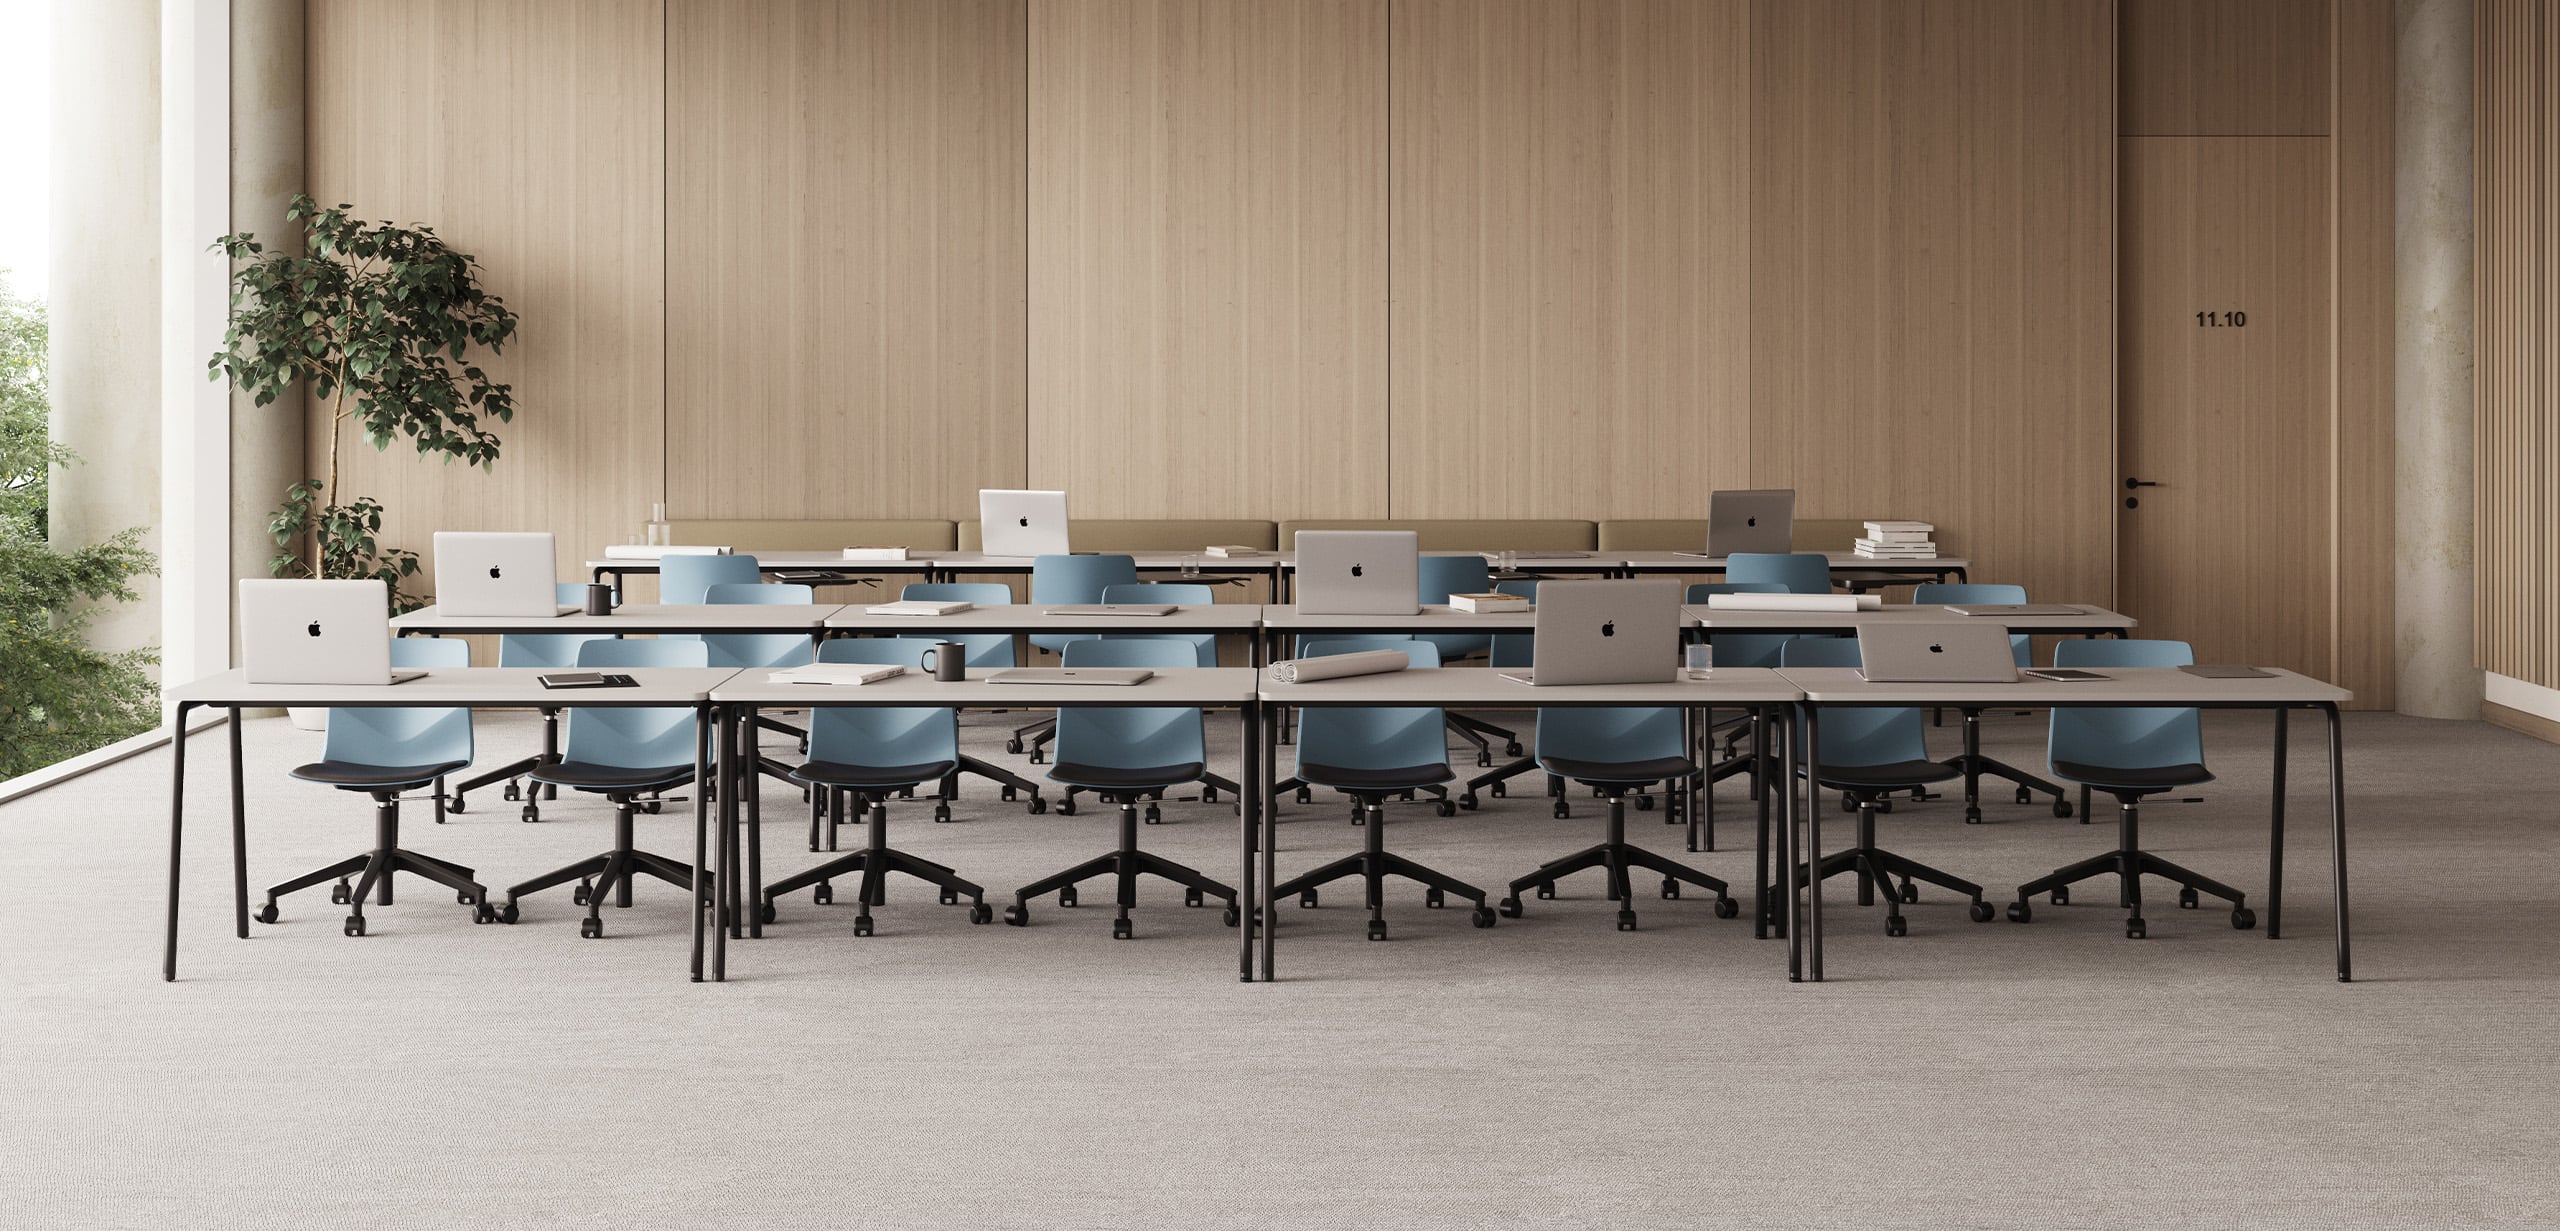 A classroom with blue office desk chairs and office desks.